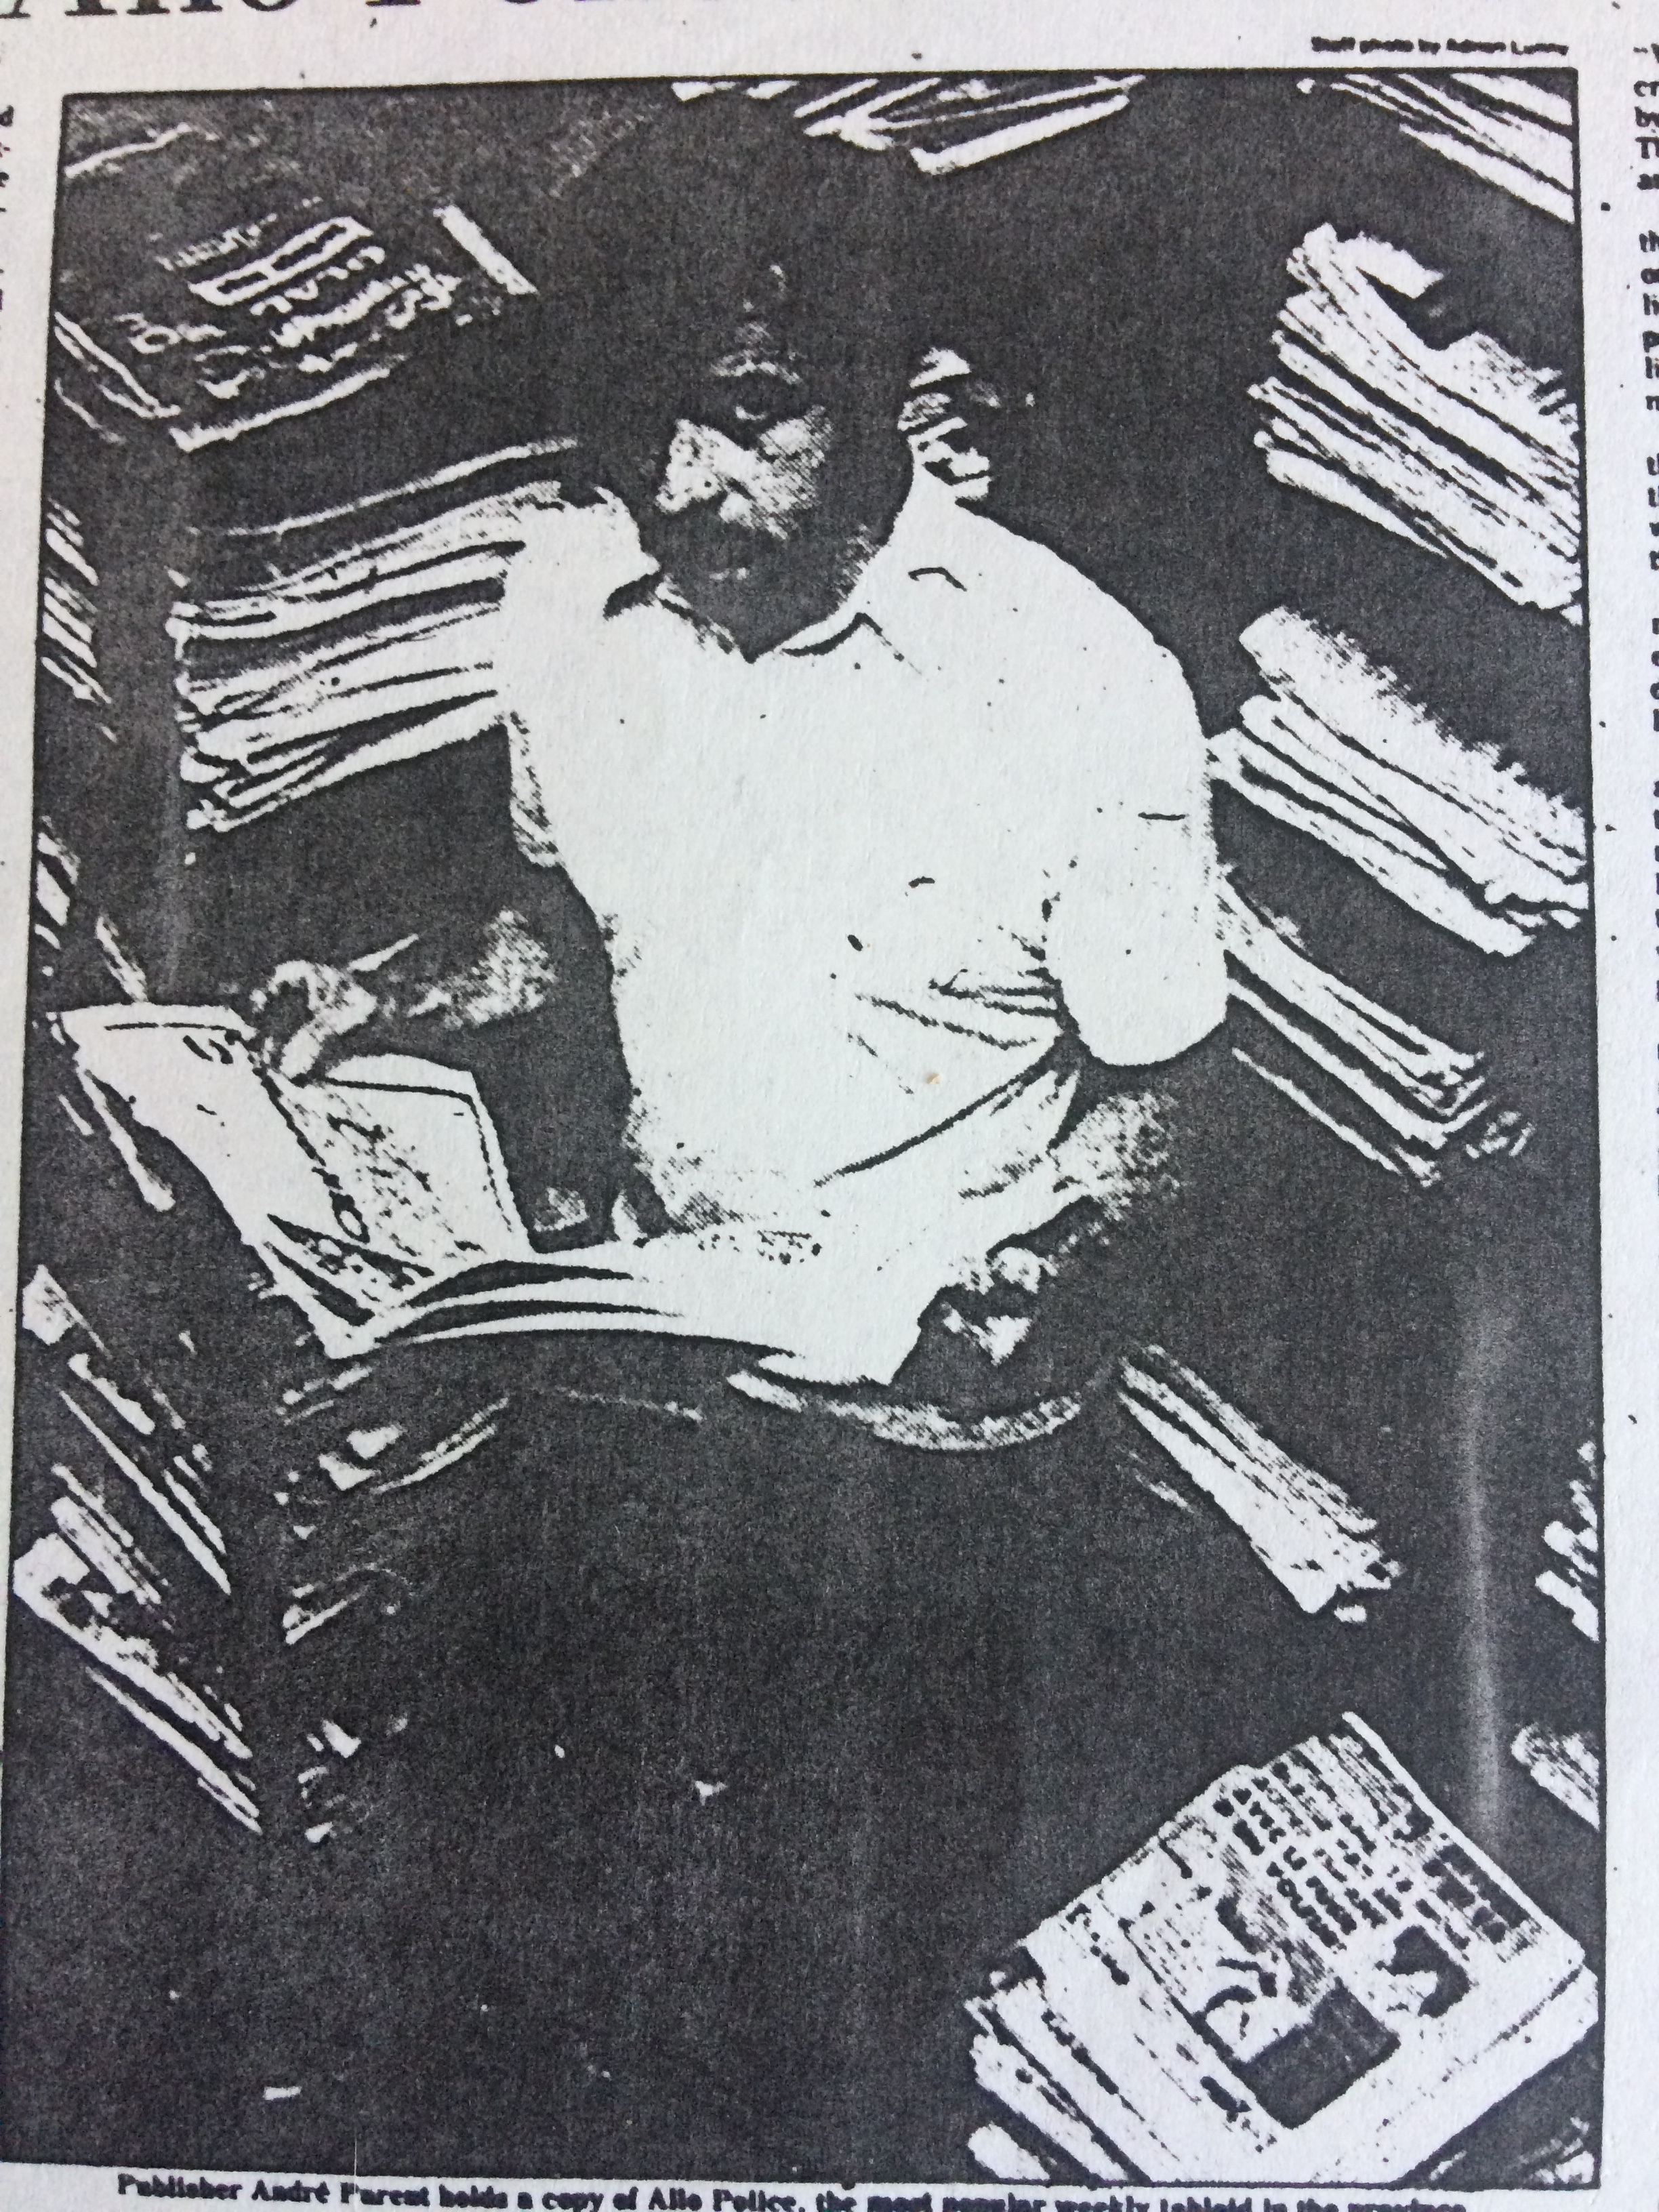 Allo Police publisher Andre Parent in 1979